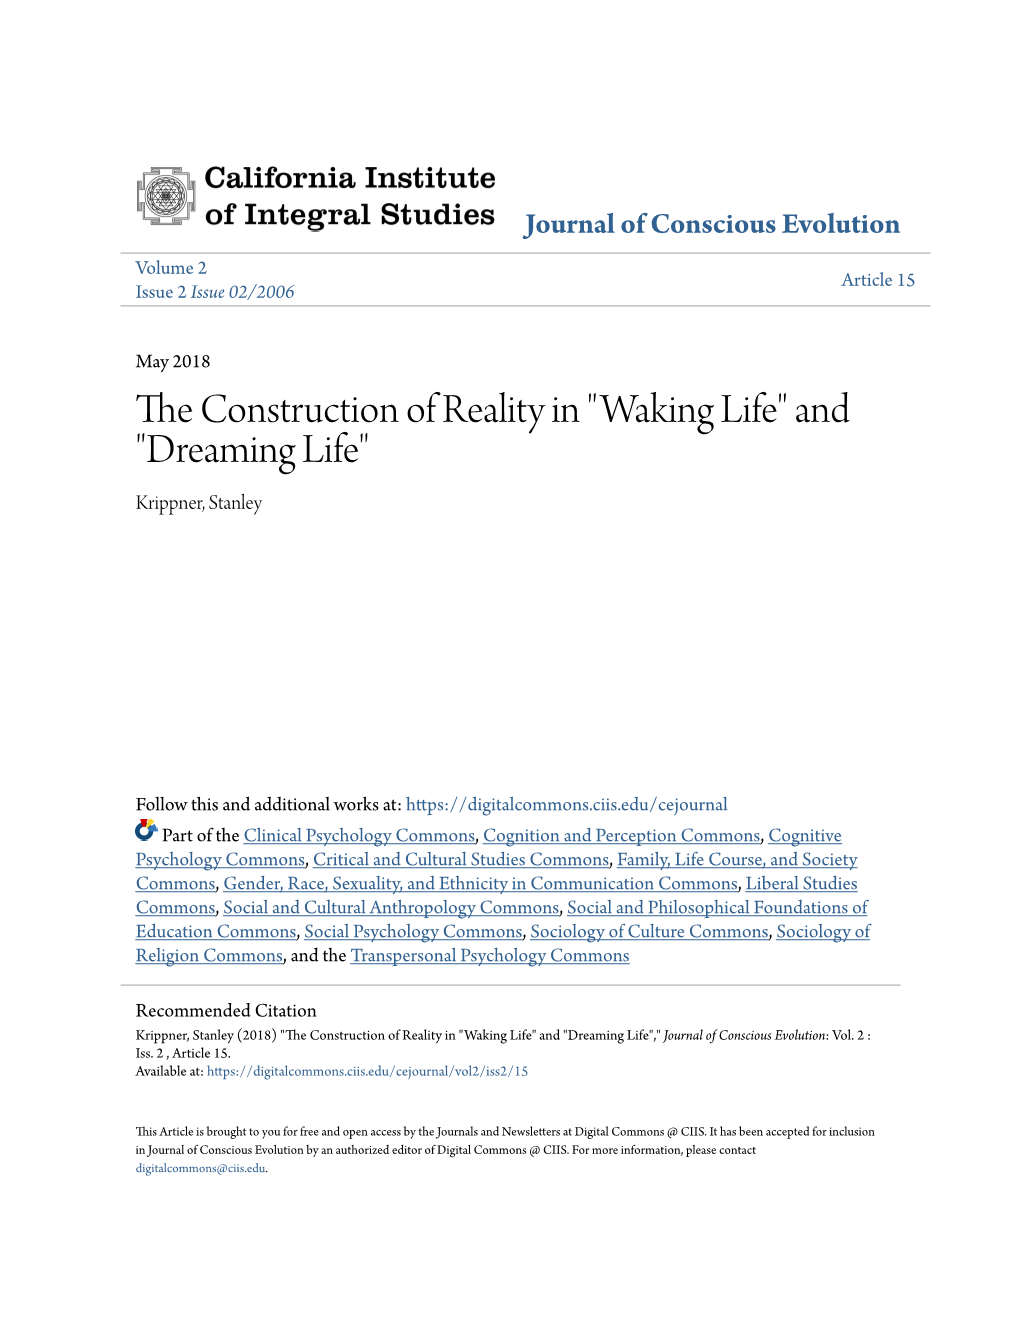 The Construction of Reality in "Waking Life" and "Dreaming Life"